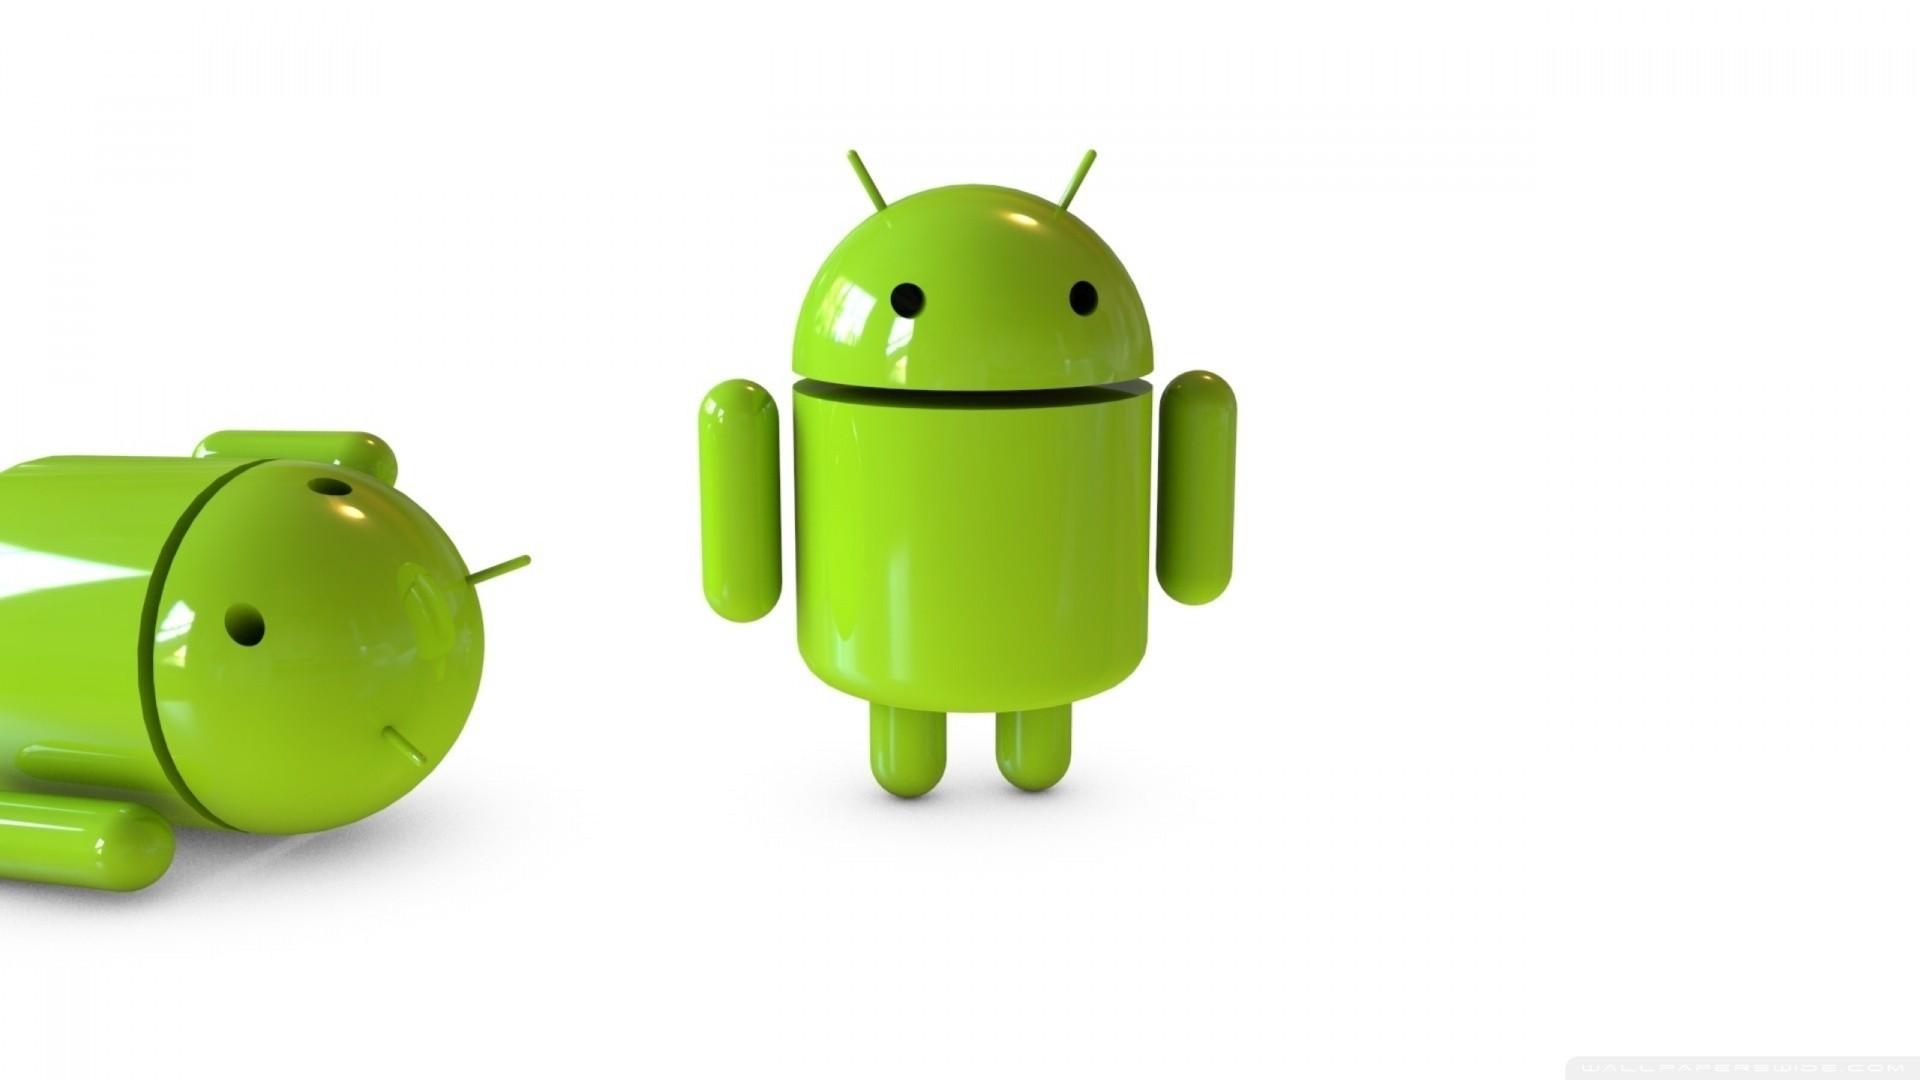 Android Robot HD Wallpaper